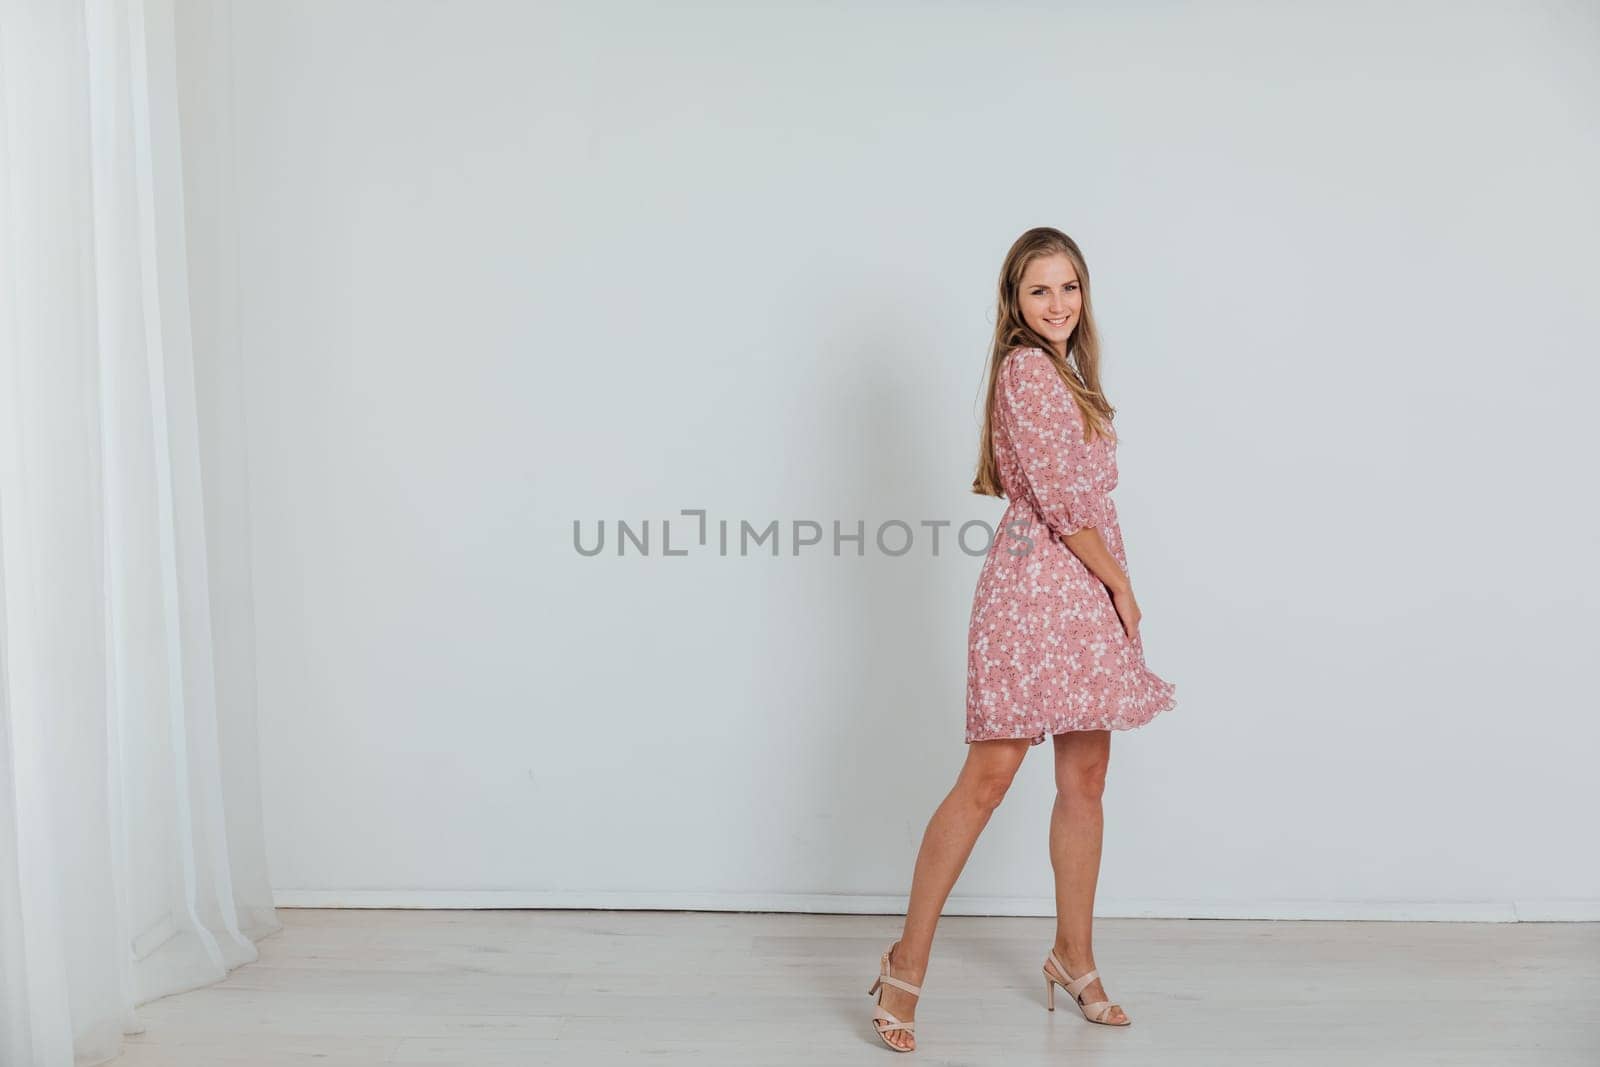 beautiful woman in a dress poses on a white background in a room